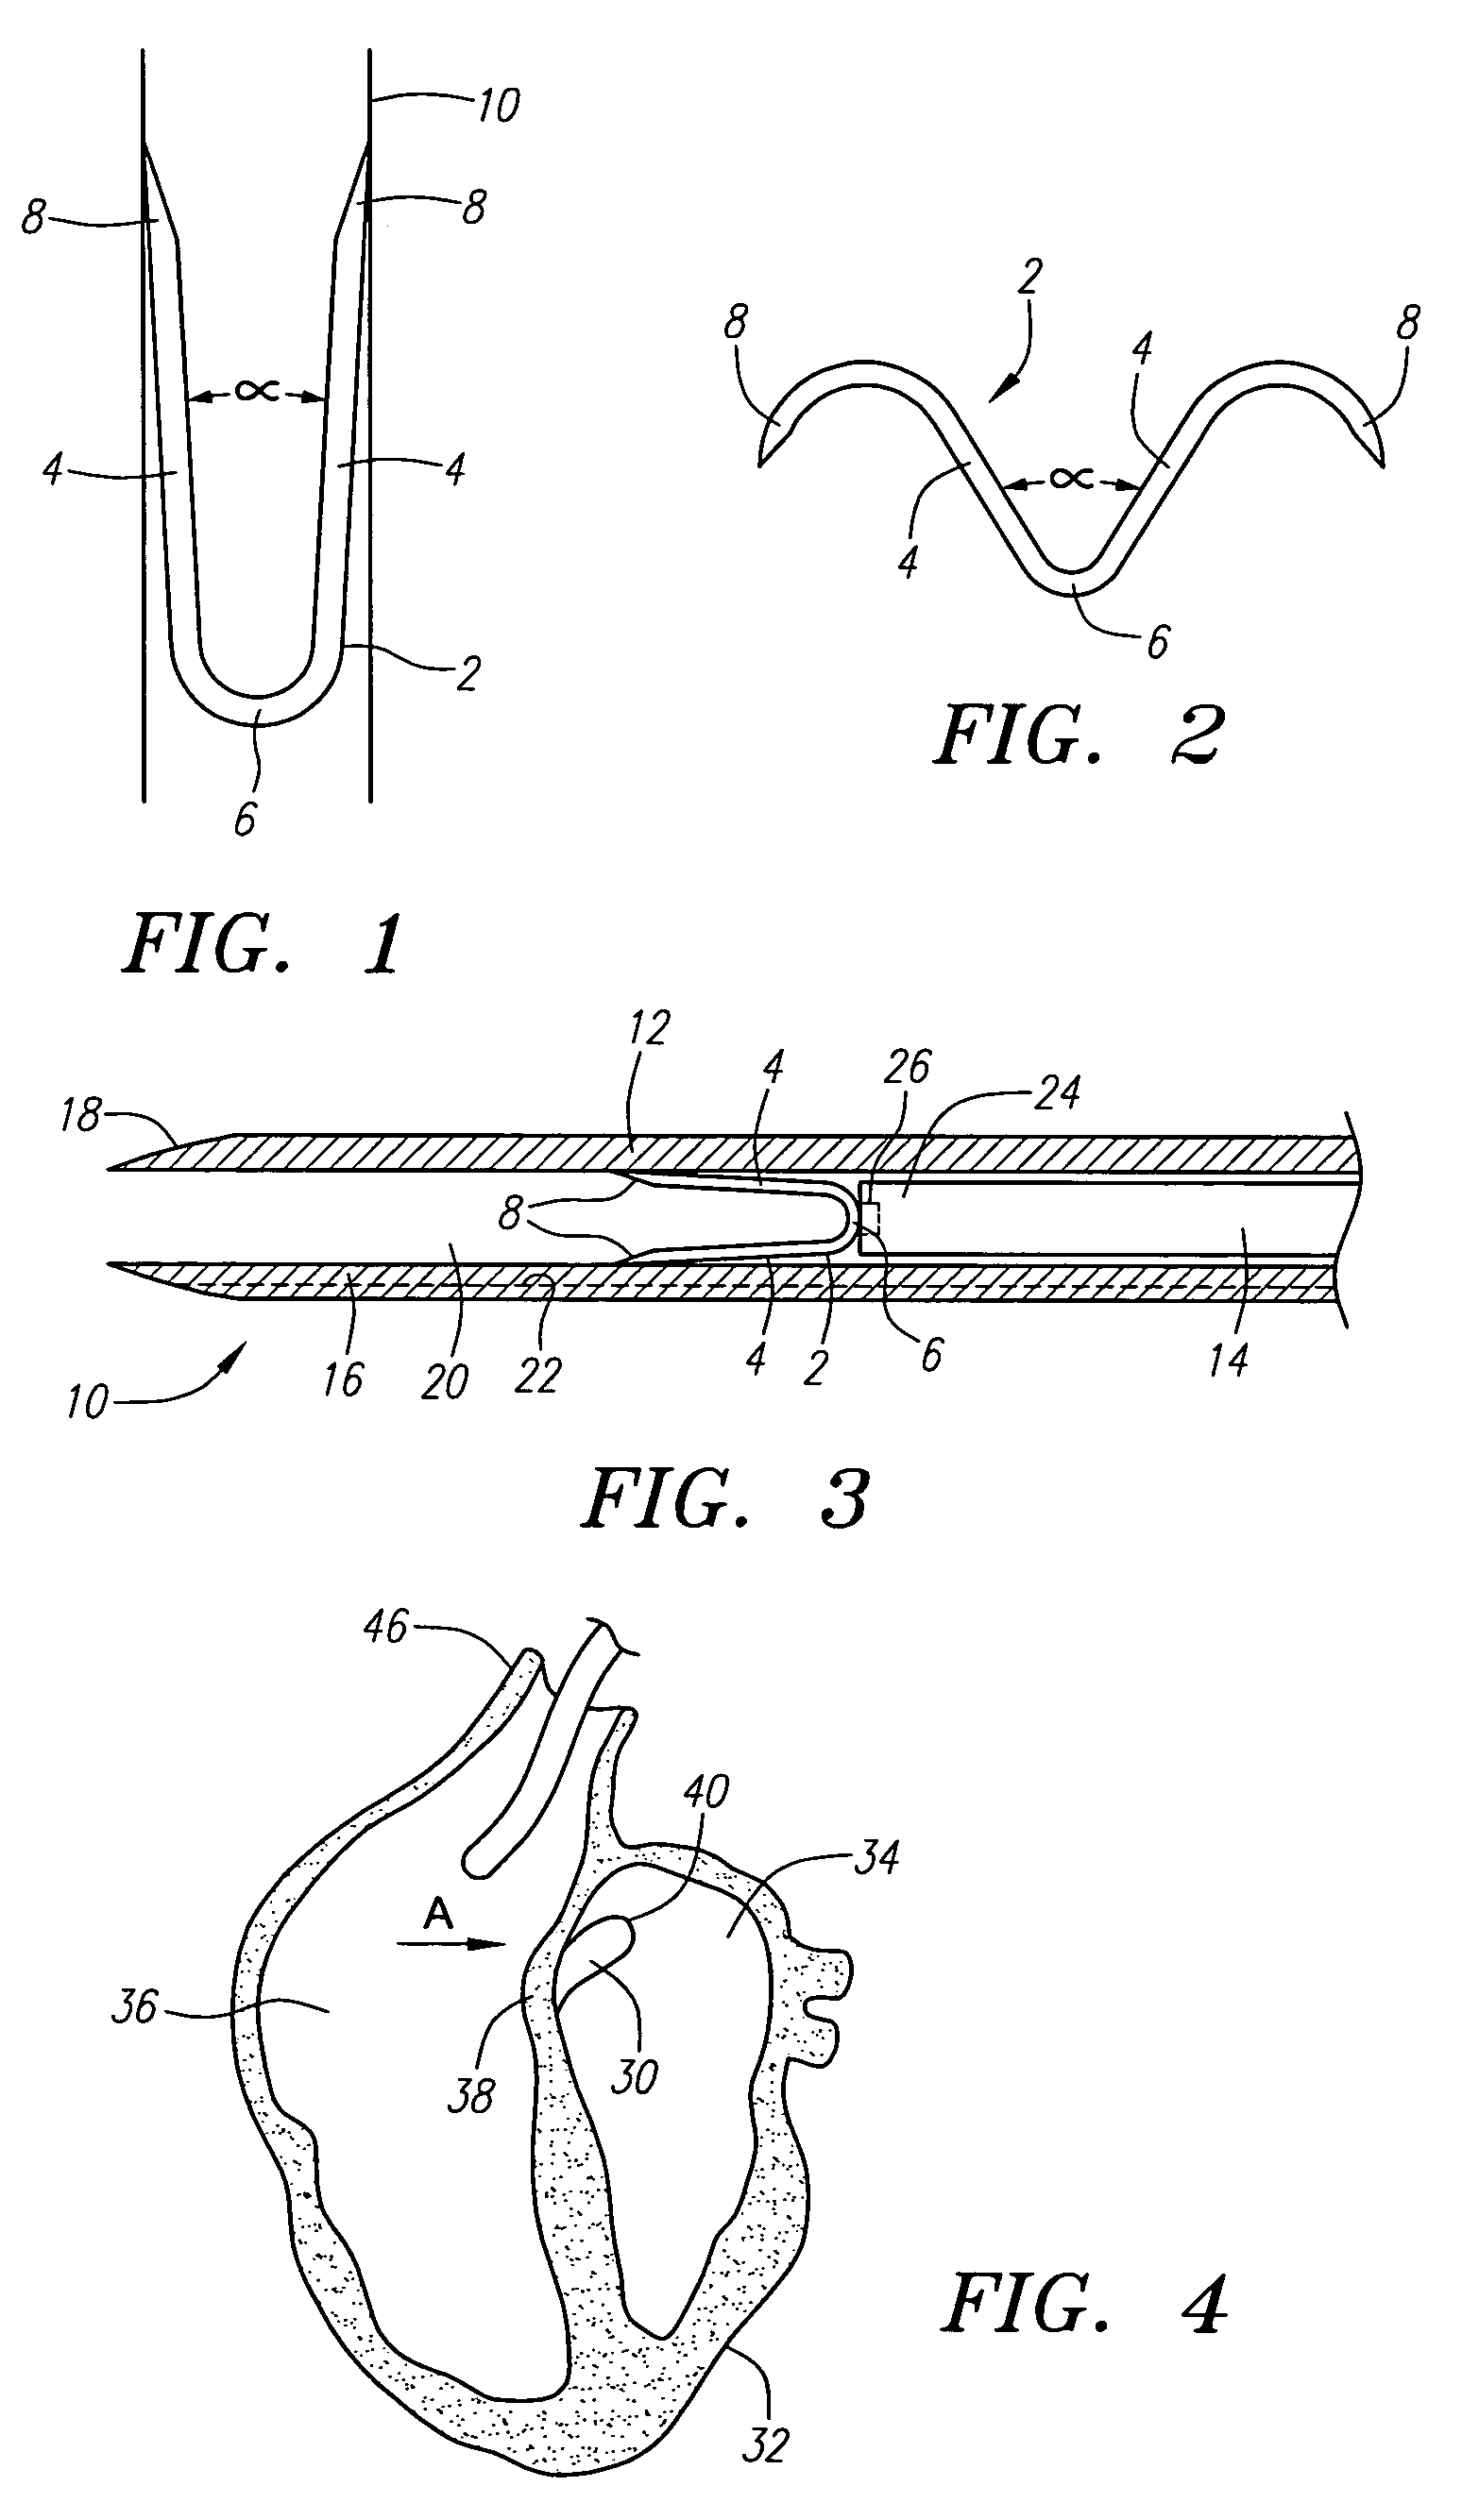 Clip apparatus for closing septal defects and methods of use